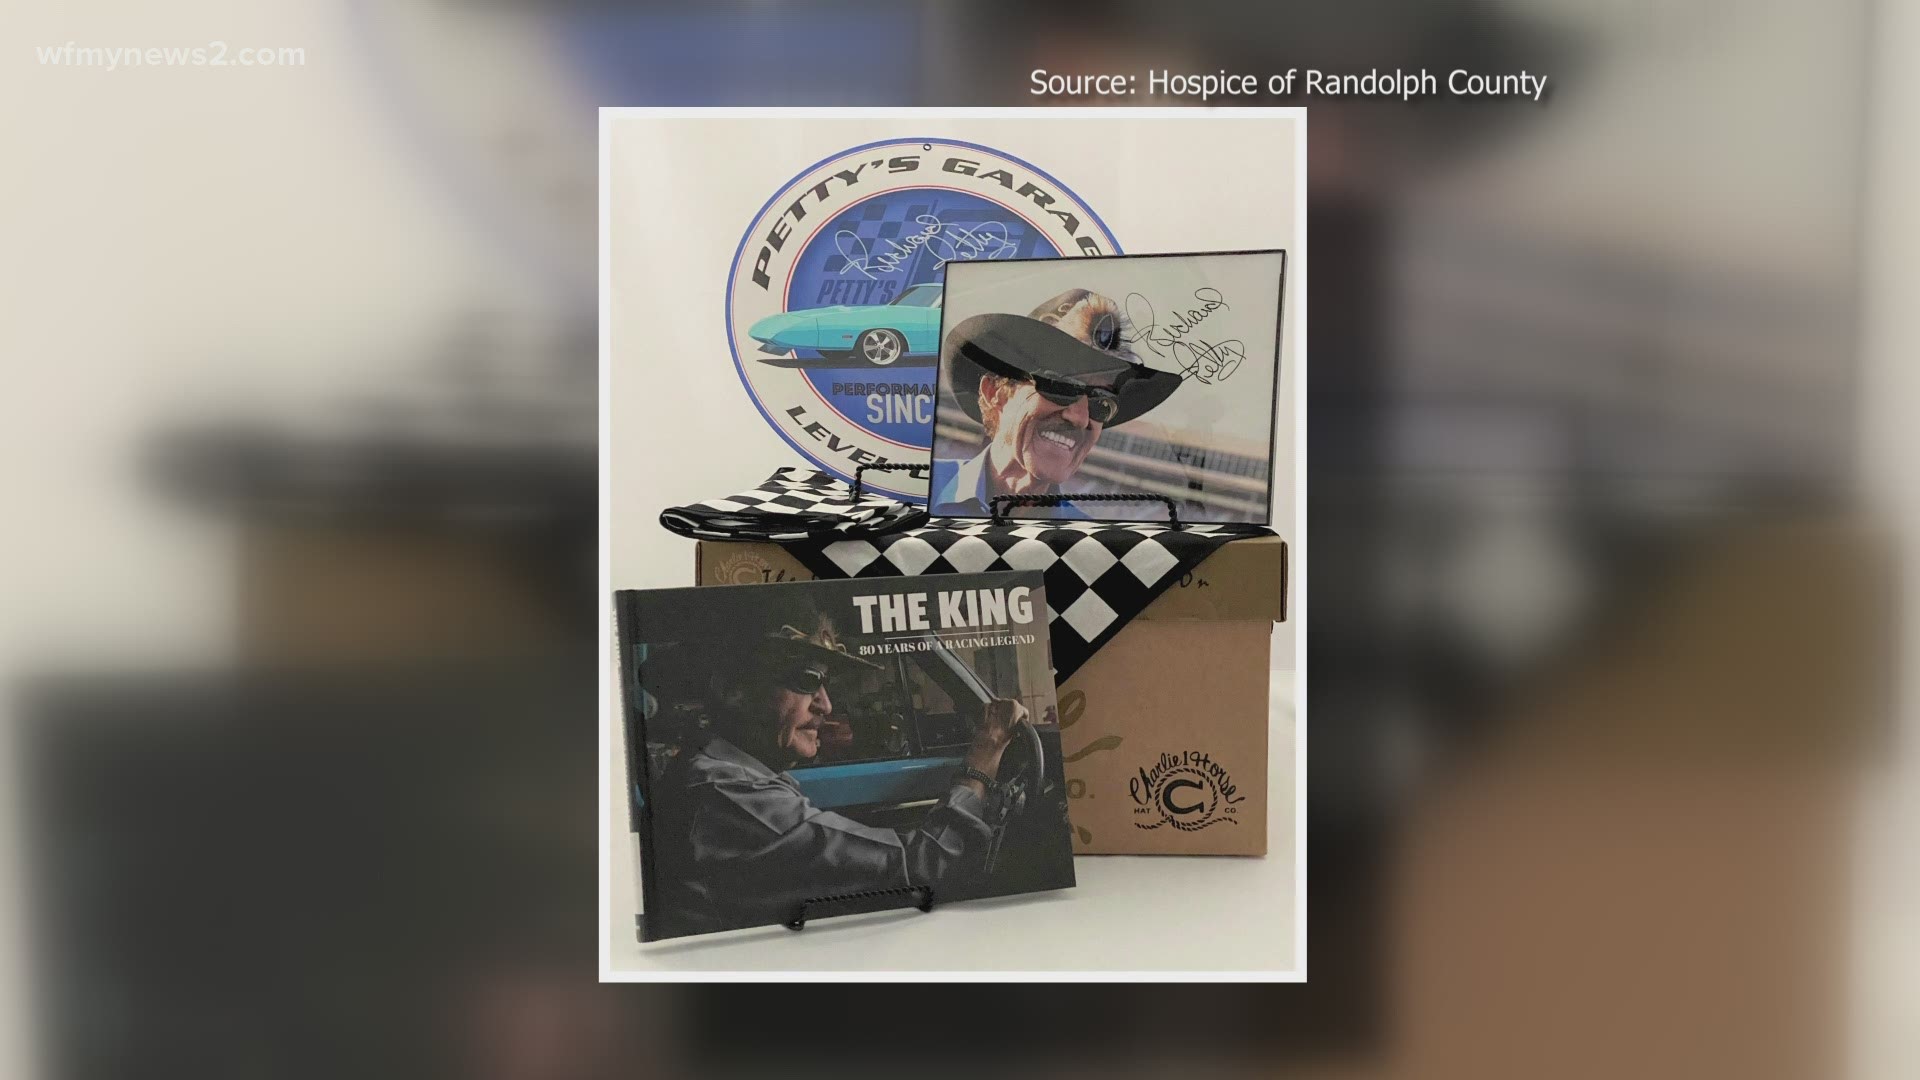 Due to COVID-19, the auction will move to a virtual event. Over 140 items including pottery, sports memorabilia and Richard Petty’s signature hat are up for auction.